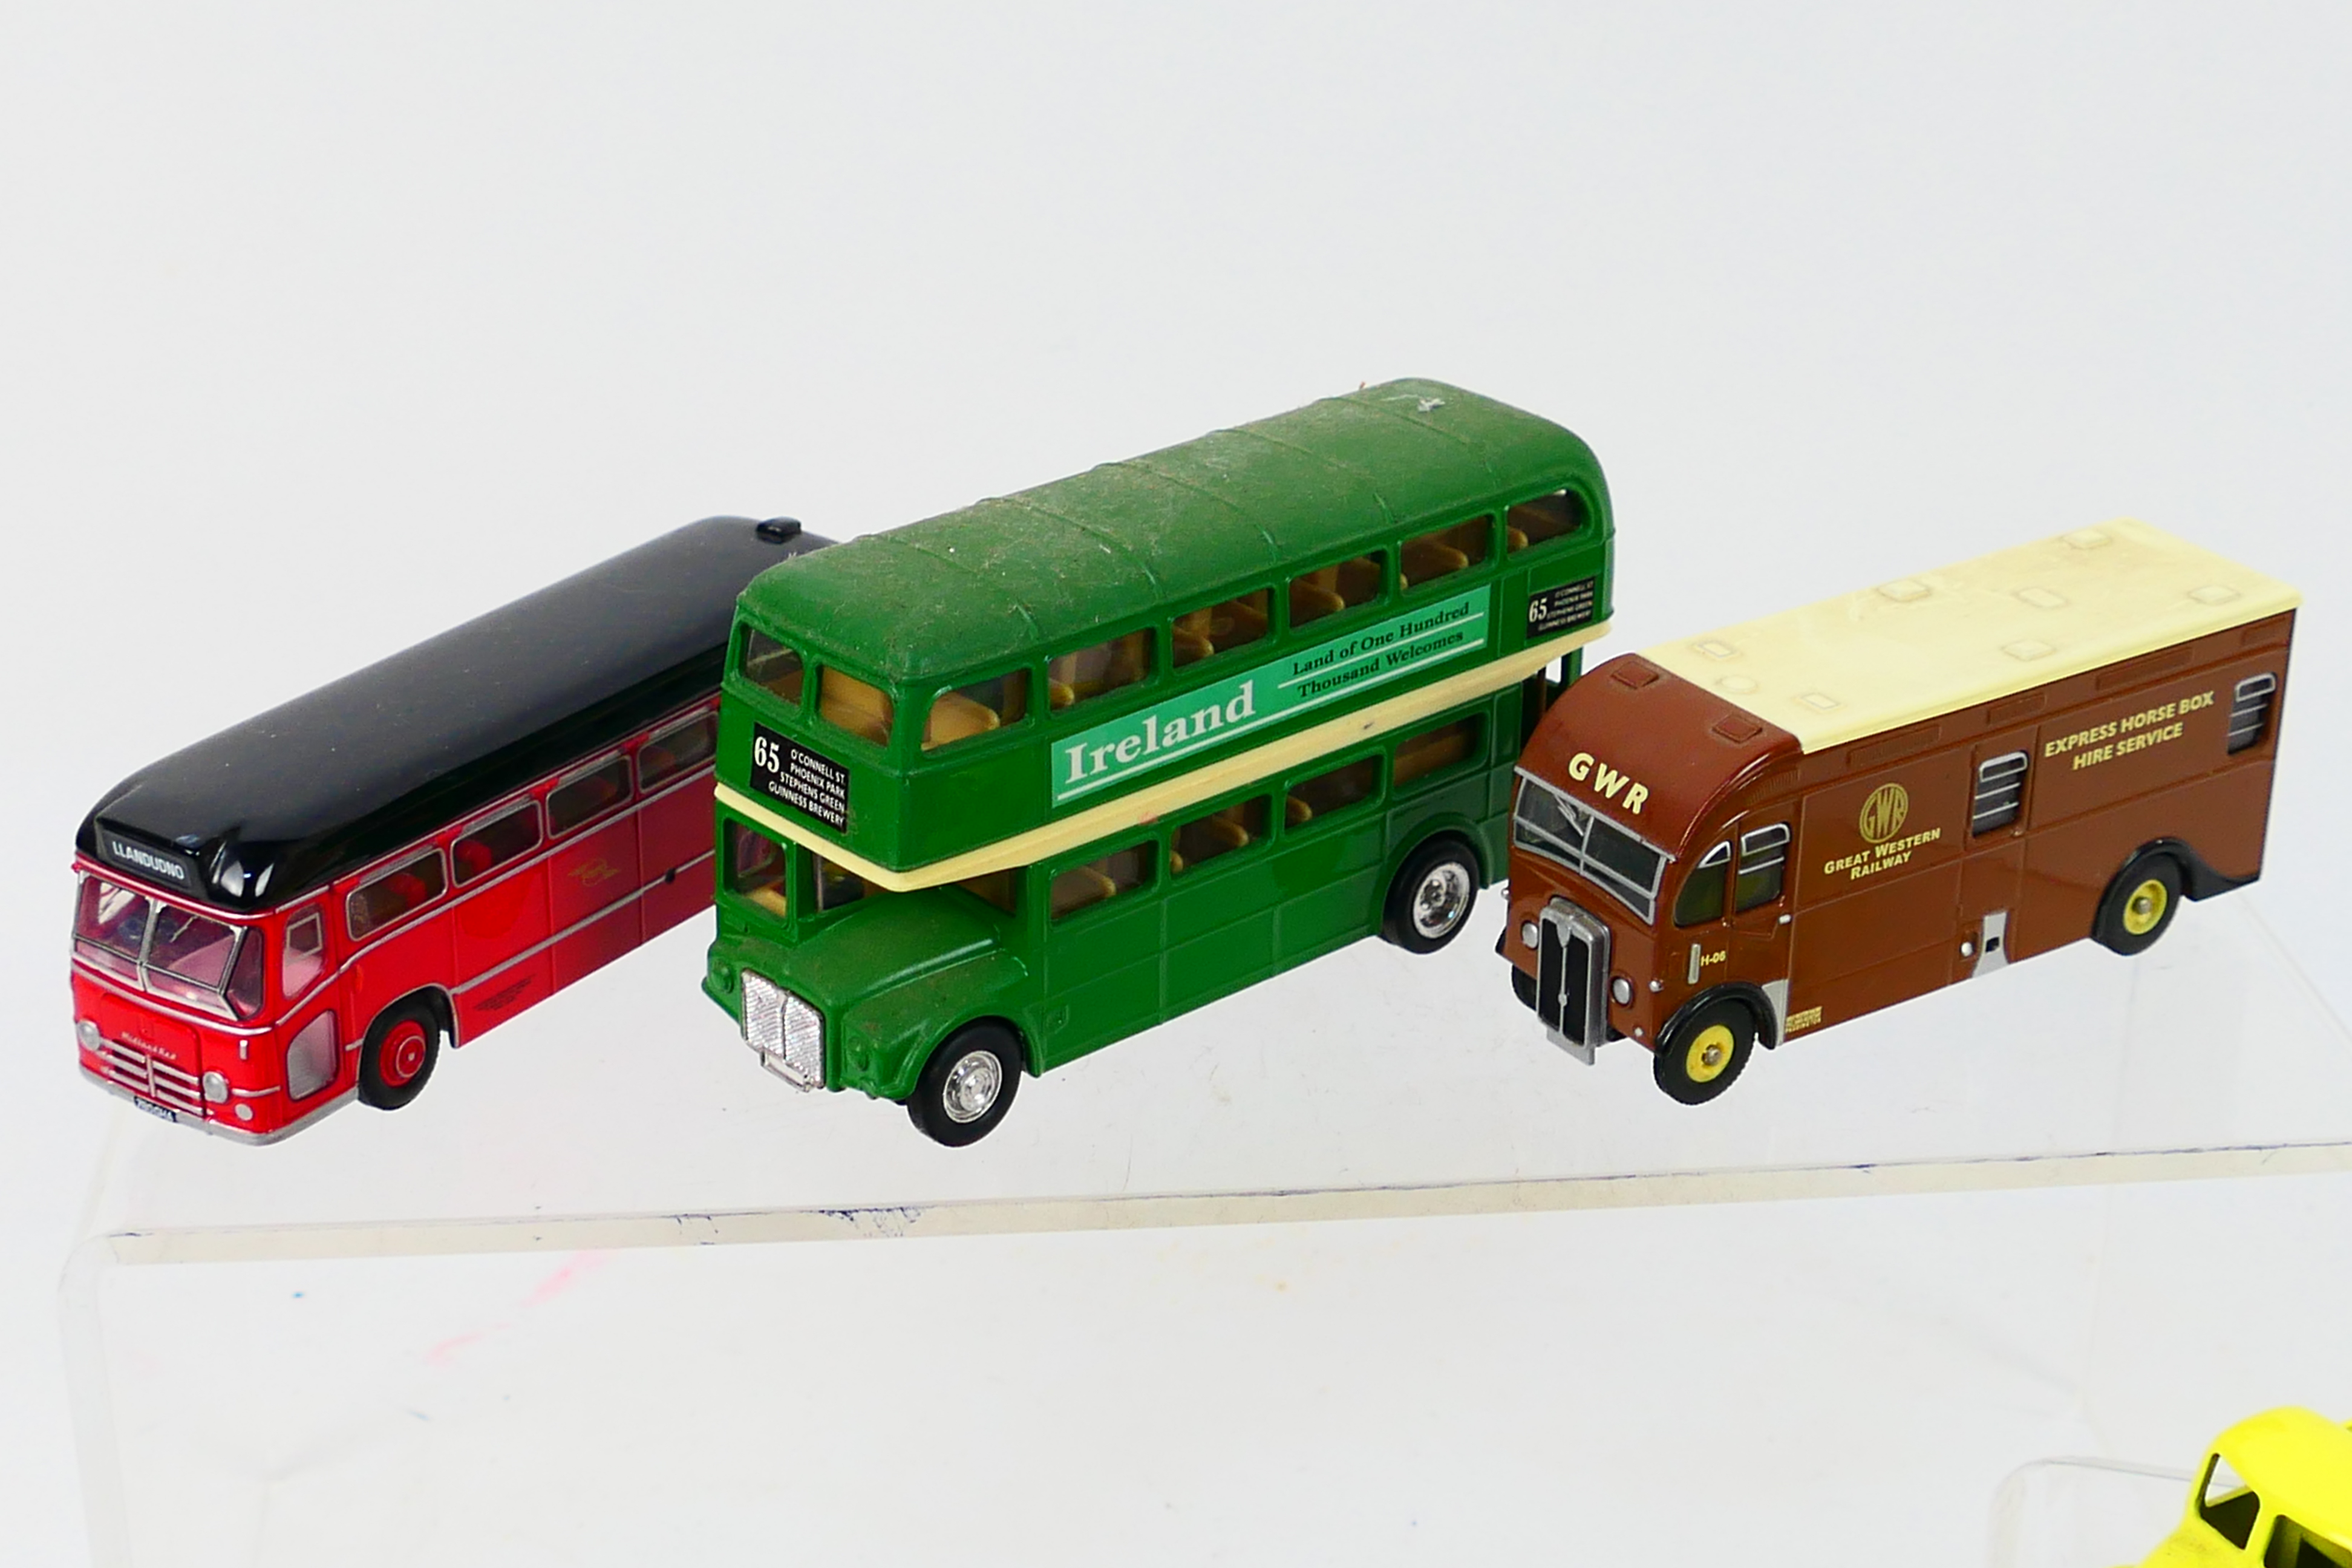 Oxford Diecast - Classix - Corgi - Lledo - Approximately 30 diecast model vehicles in various - Image 2 of 6